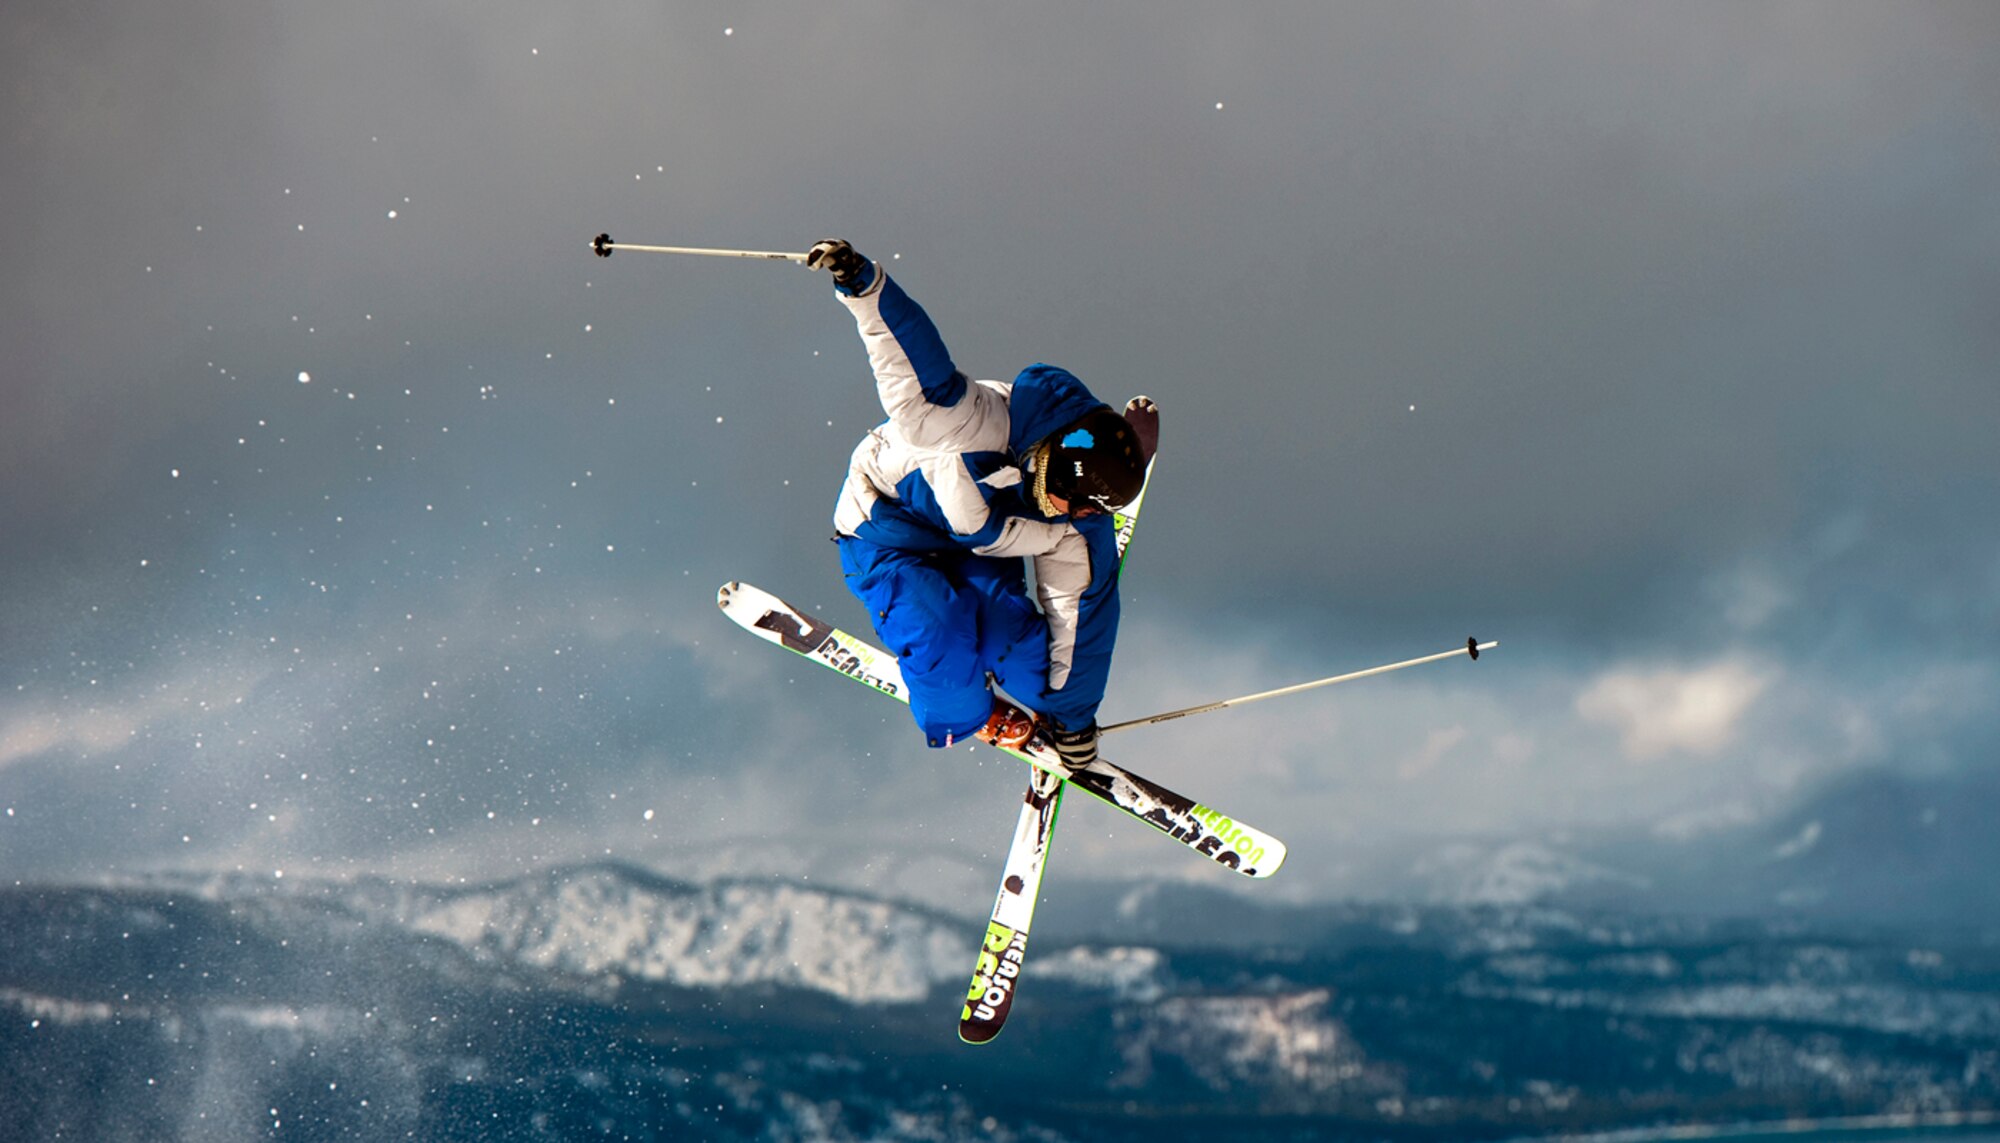 Winter sports, such as skiing, can be fun, but people need to understand the threats the weather conditions impose. (Photo by Tech. Sgt. Samuel Bendet)